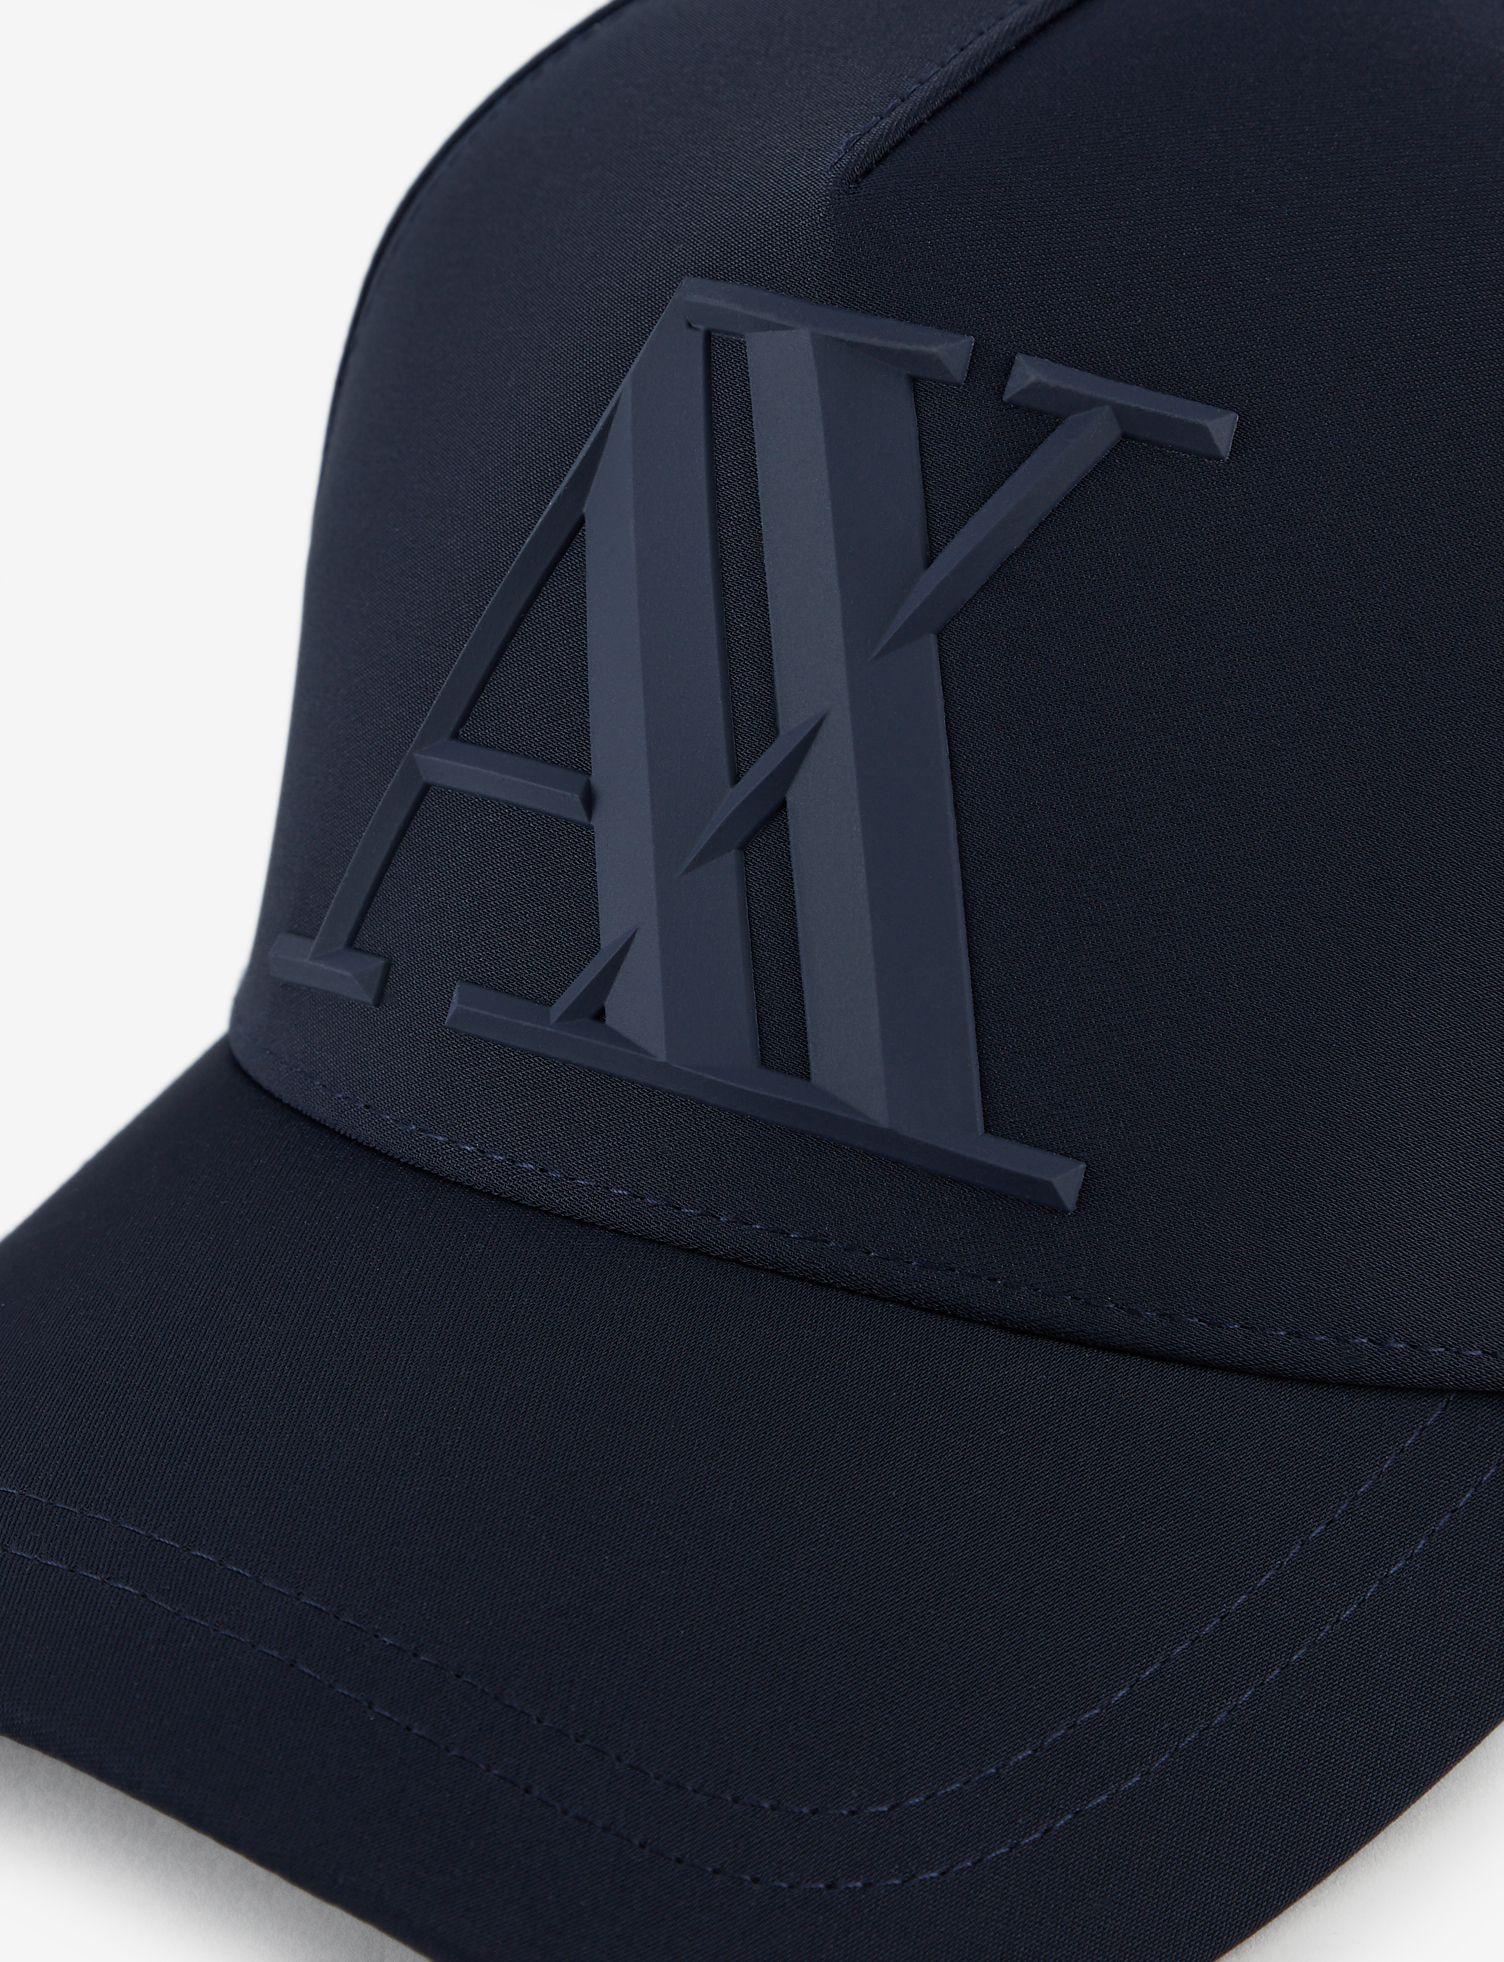 Armani Exchange Rubber Ax Baseball Cap in Navy Blue (Blue) for Men - Lyst